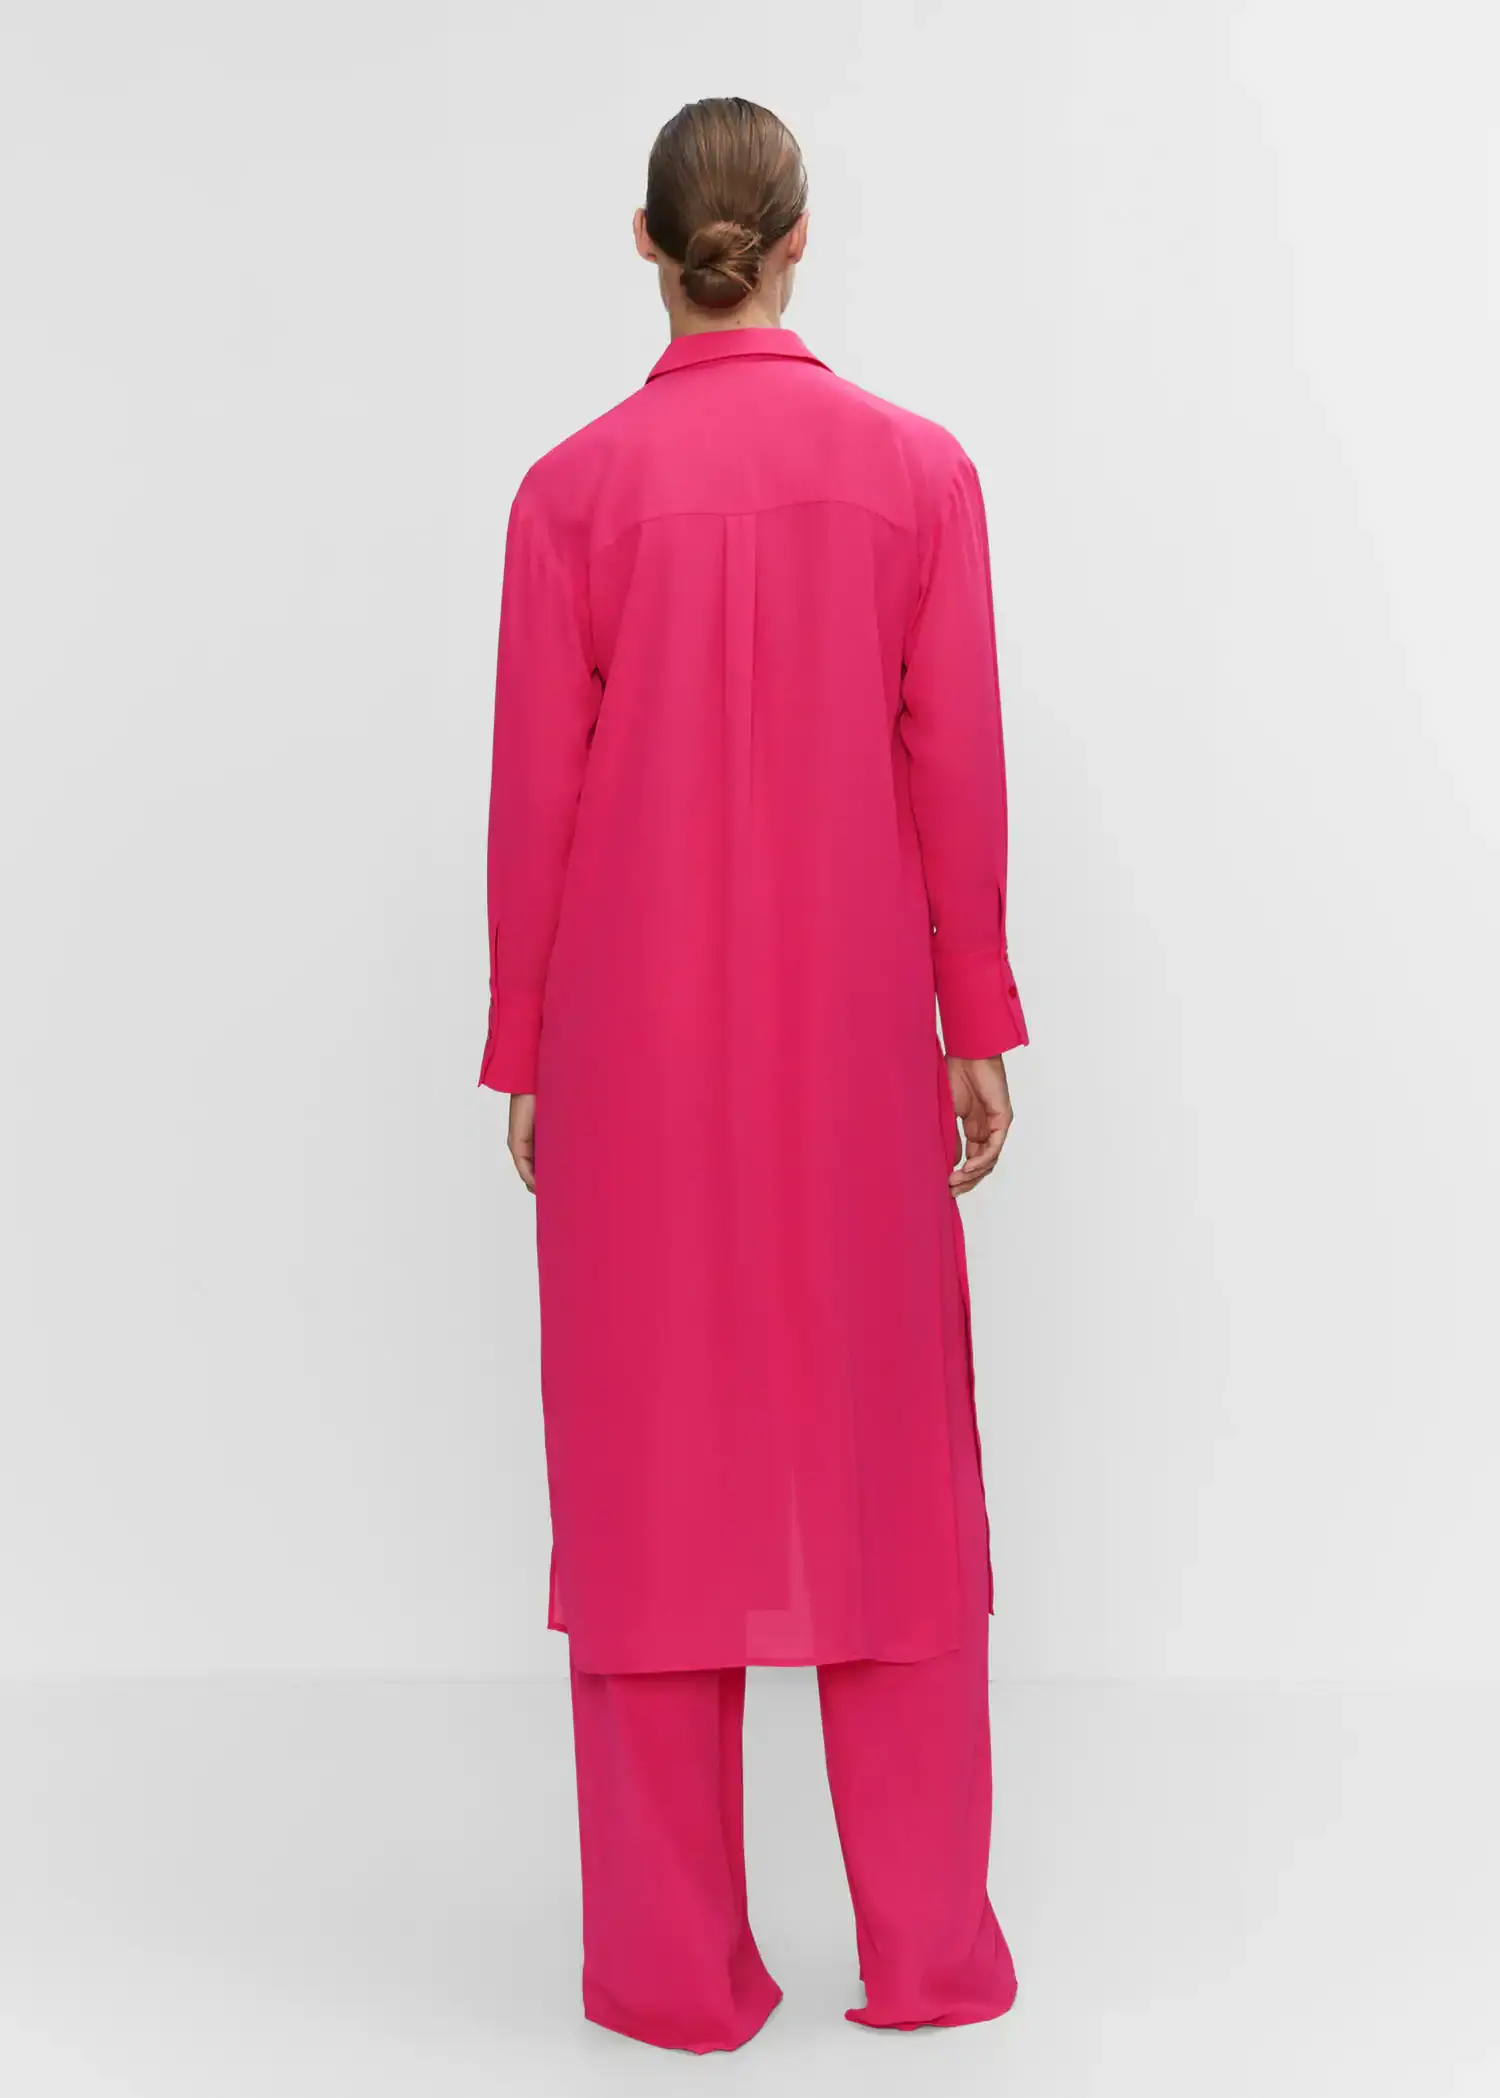 Mango Shirt dress with slits. a person wearing a long pink robe and pants. 